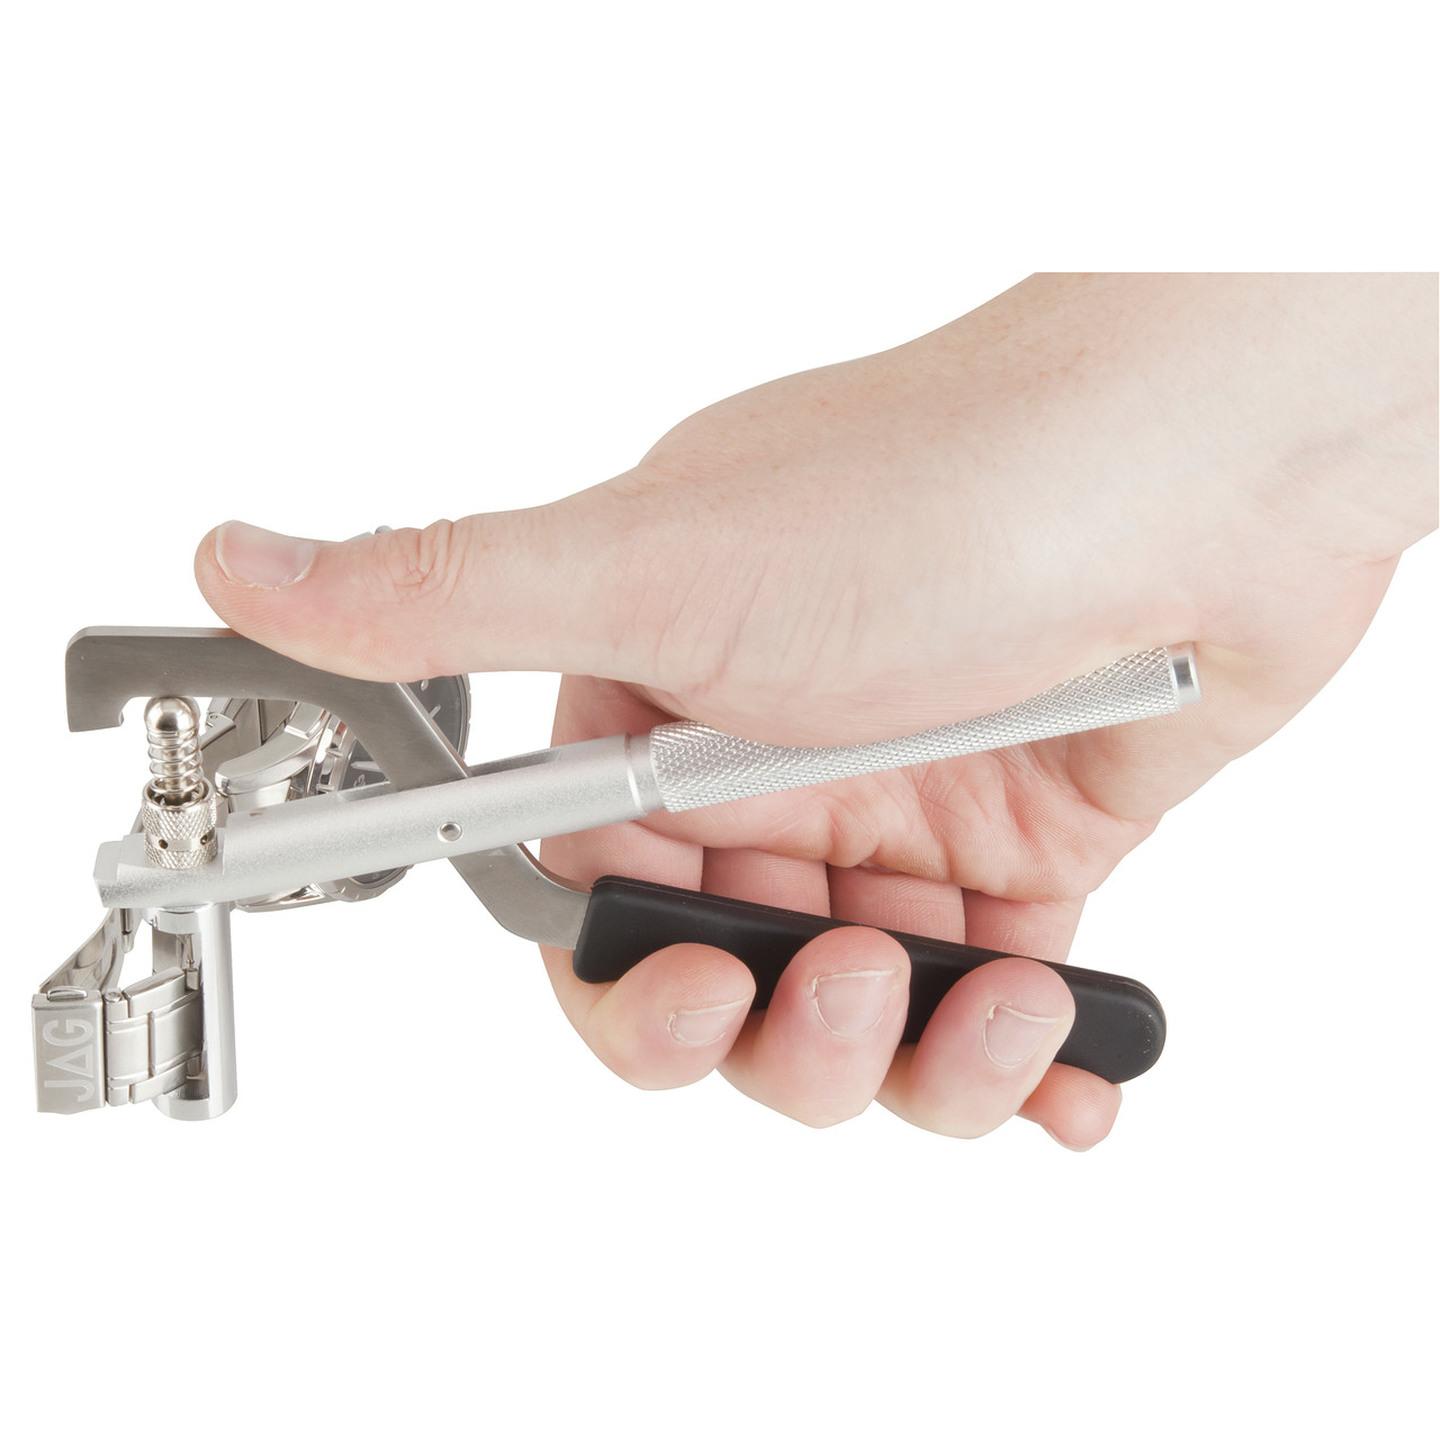 Bracelet Link Remover Tool for Watches